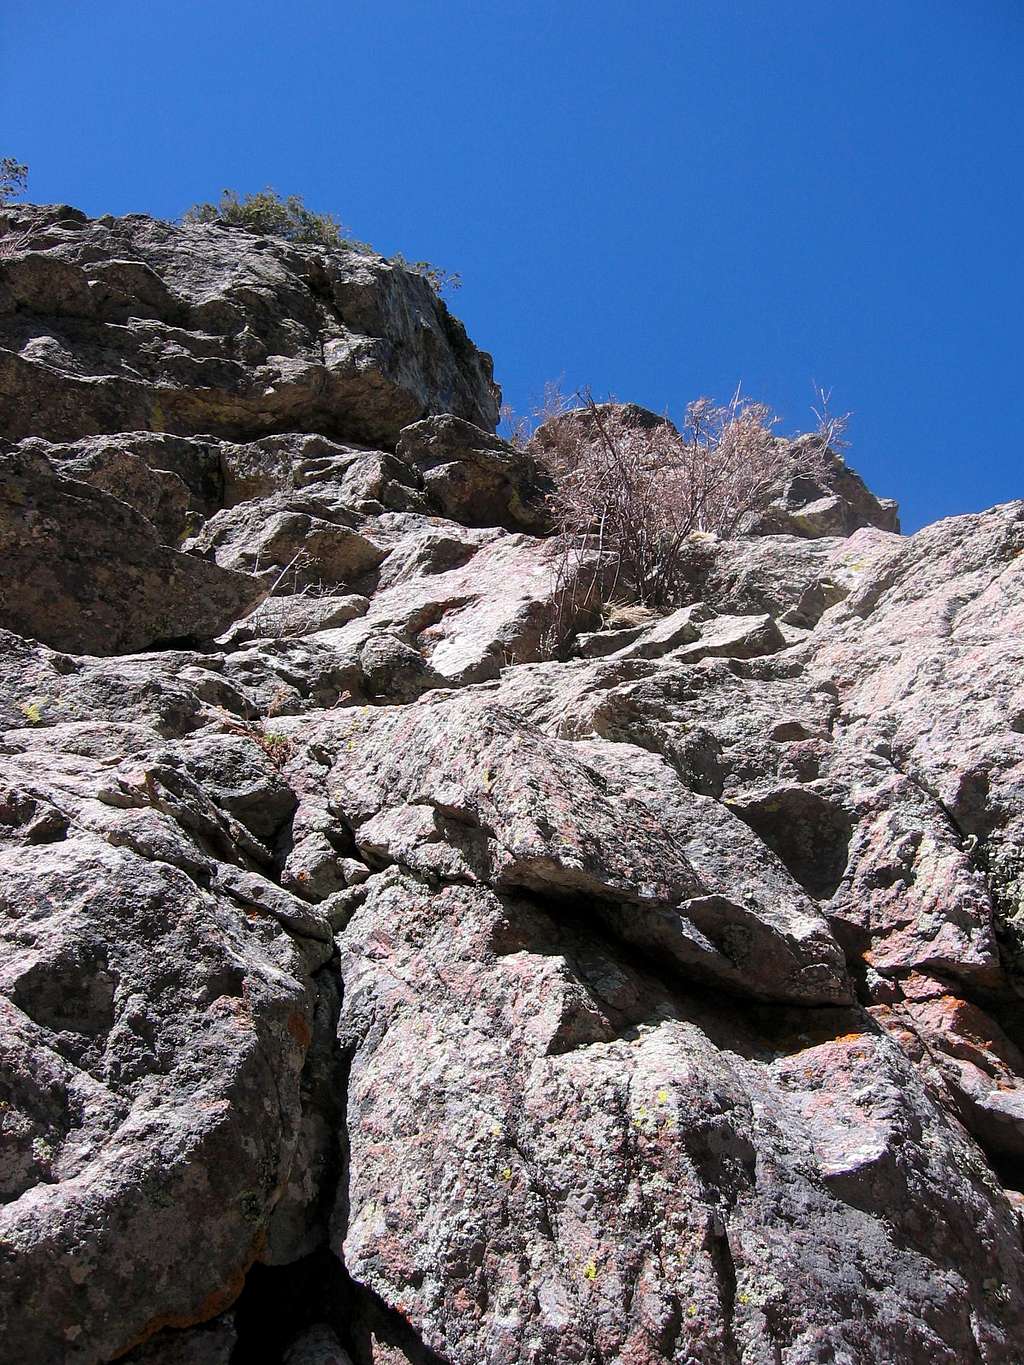 Looking up the East Saddle Route